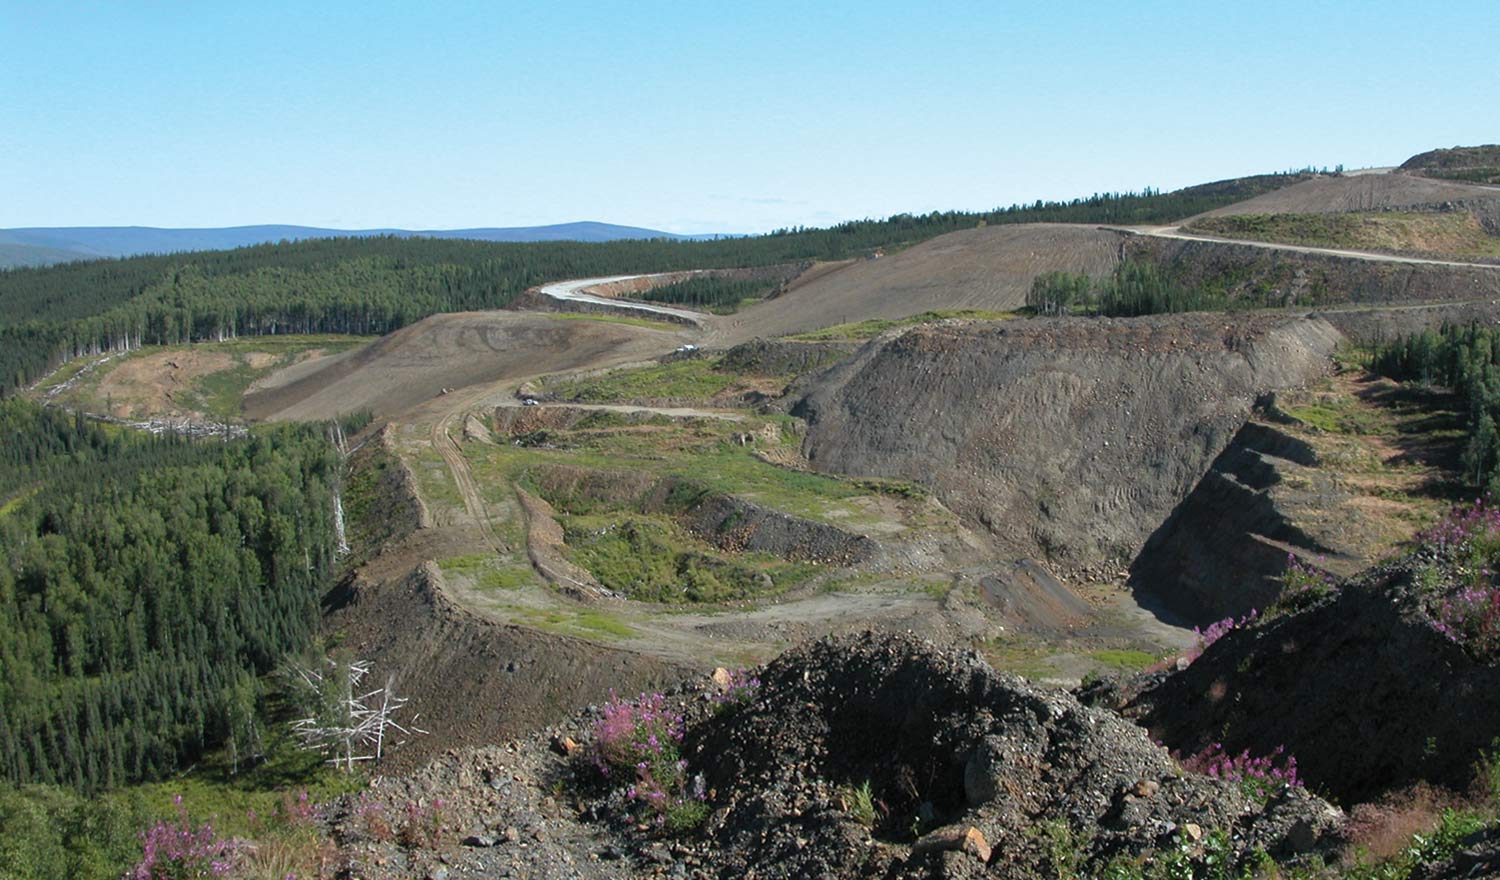 View of True North mining site before reclamation